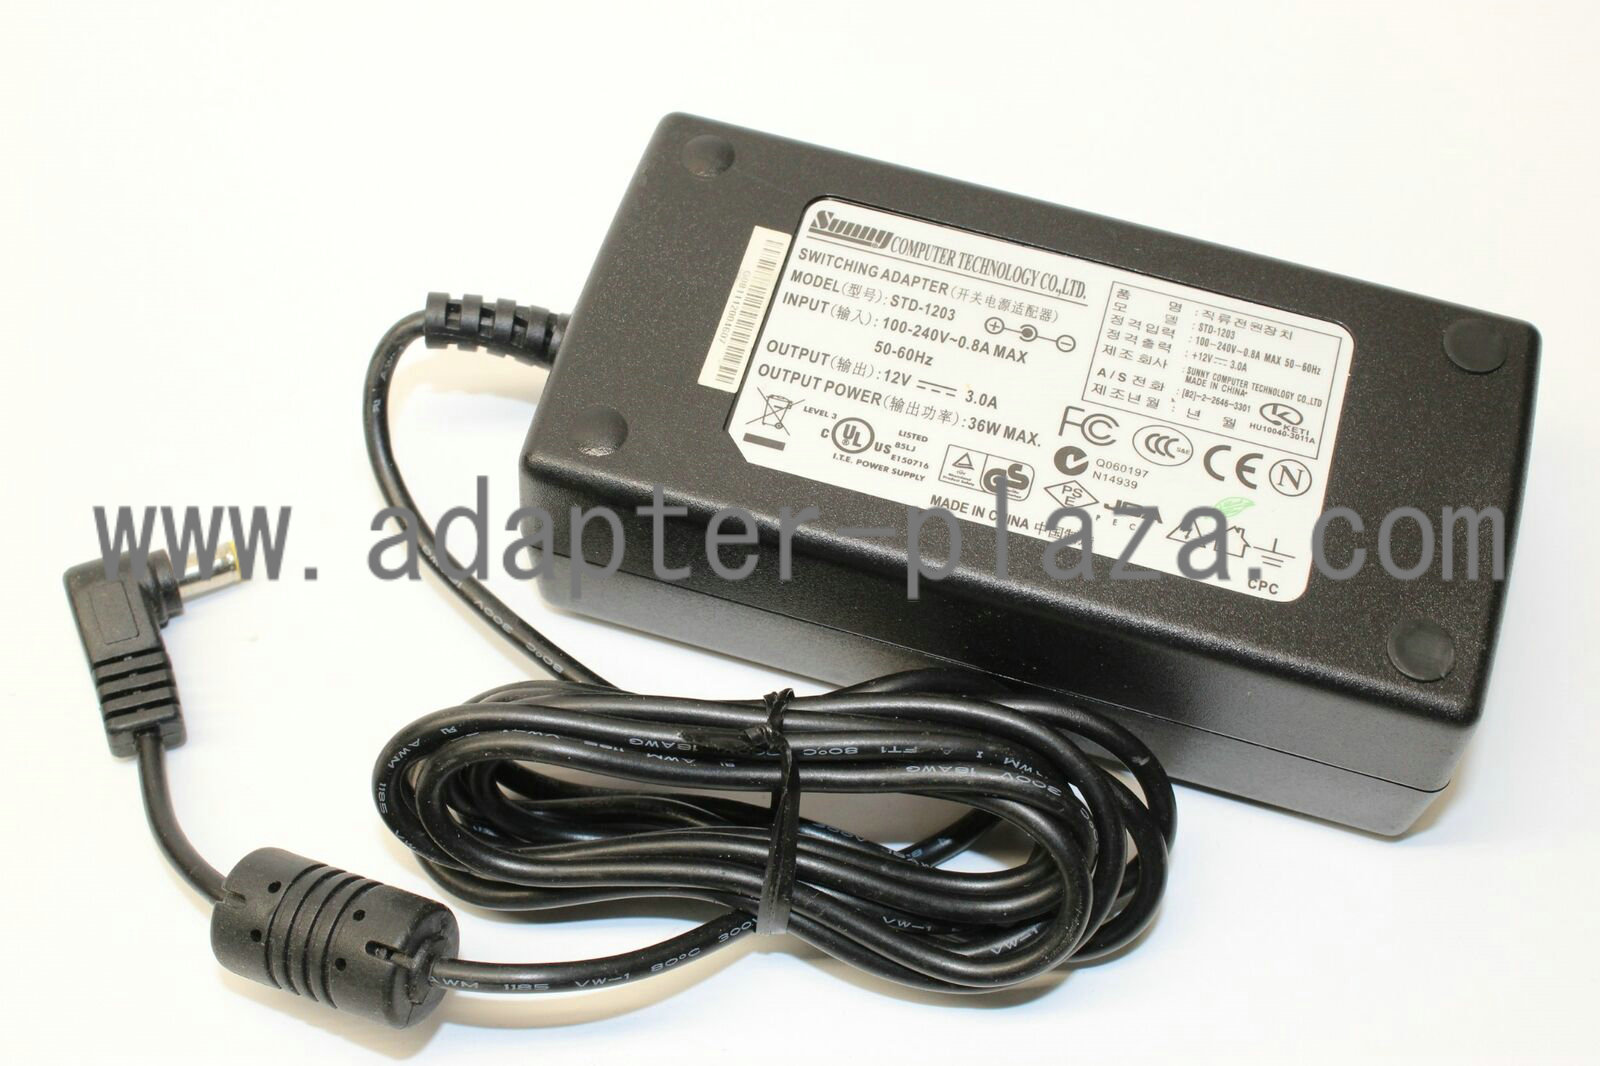 New Sunny STD-1203 Switching Adapter 12V 3A Transformer Charger Power Supply - Click Image to Close